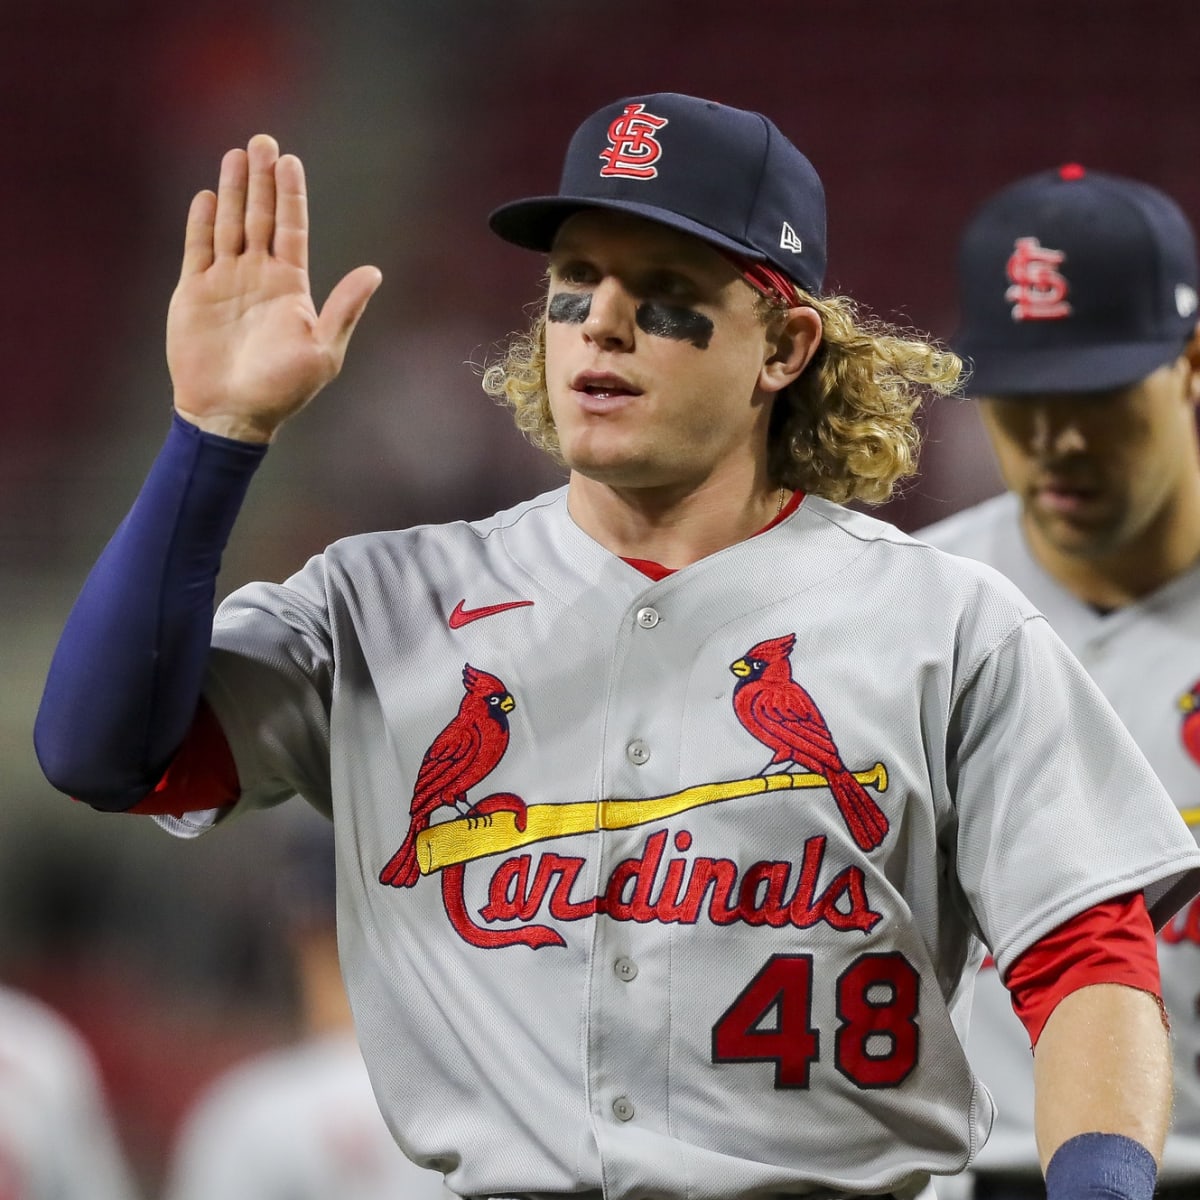 Yankees acquire Harrison Bader from Cardinals in last-second deadline deal